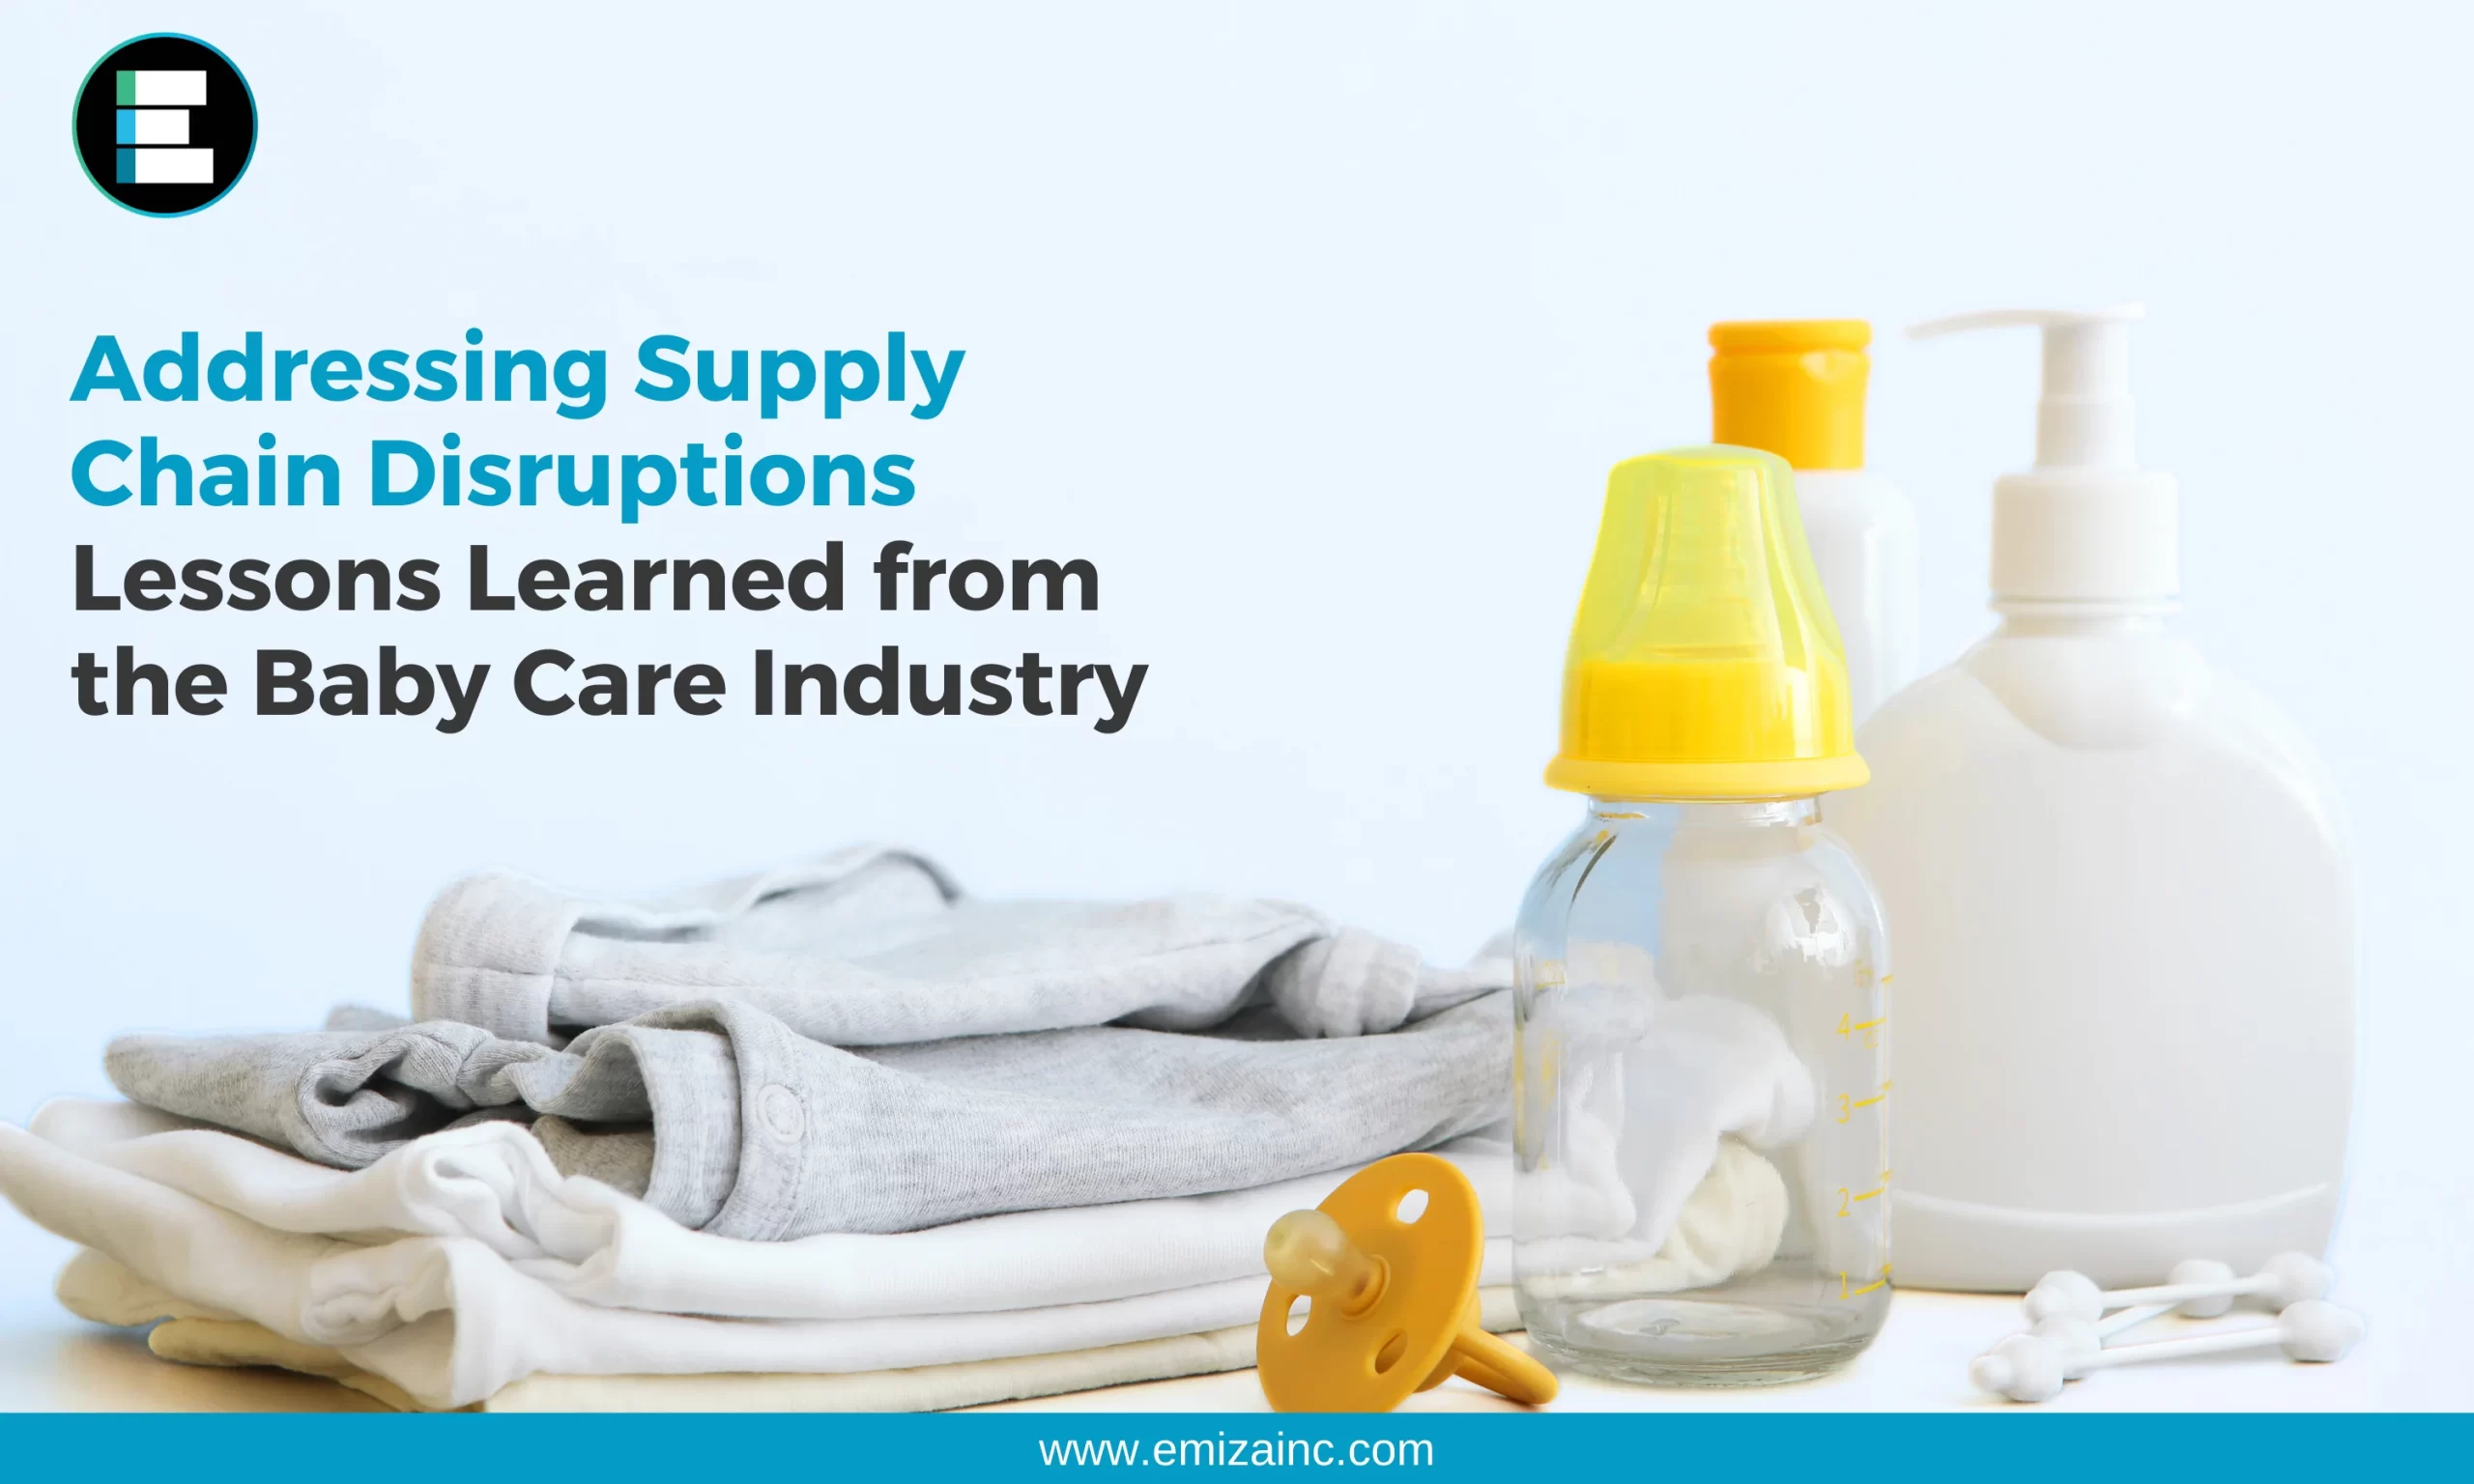 Addressing Supply Chain Disruptions Lessons Learned from the Baby Care Industry